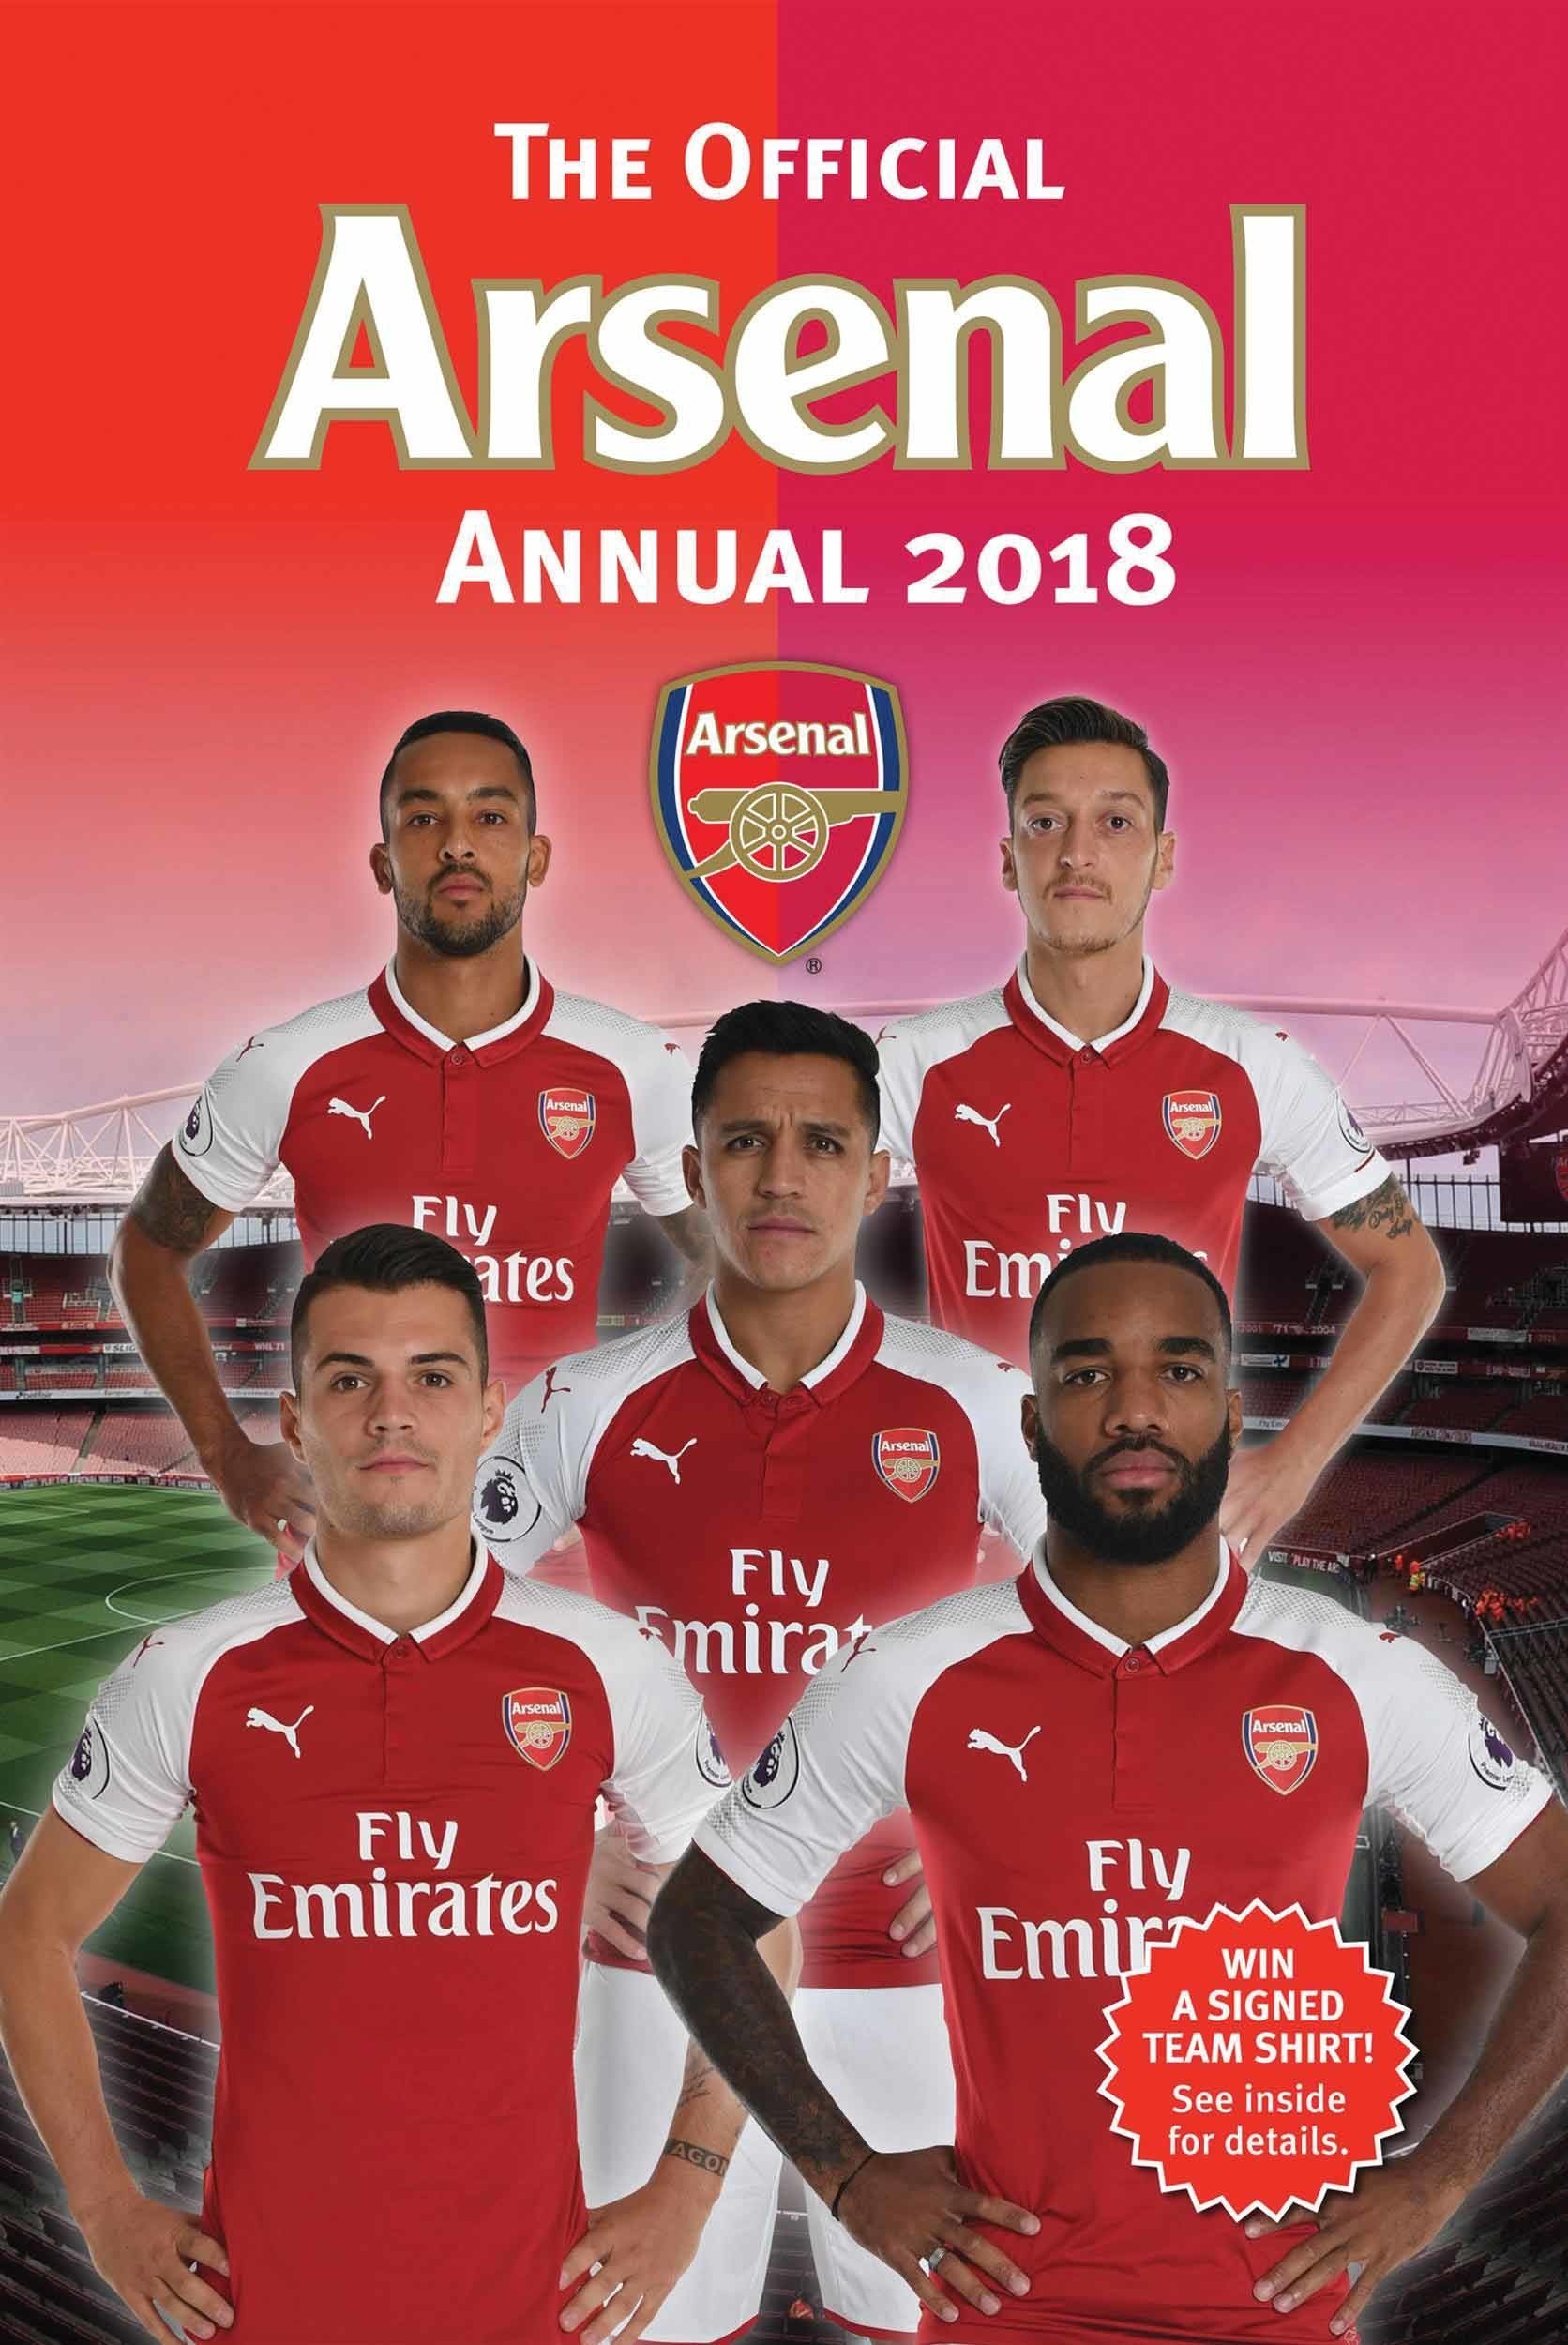 Arsenal Wallpaper 2018 86 Images Aaron Ramsey Arsenal - Official Arsenal Annual 2018 , HD Wallpaper & Backgrounds